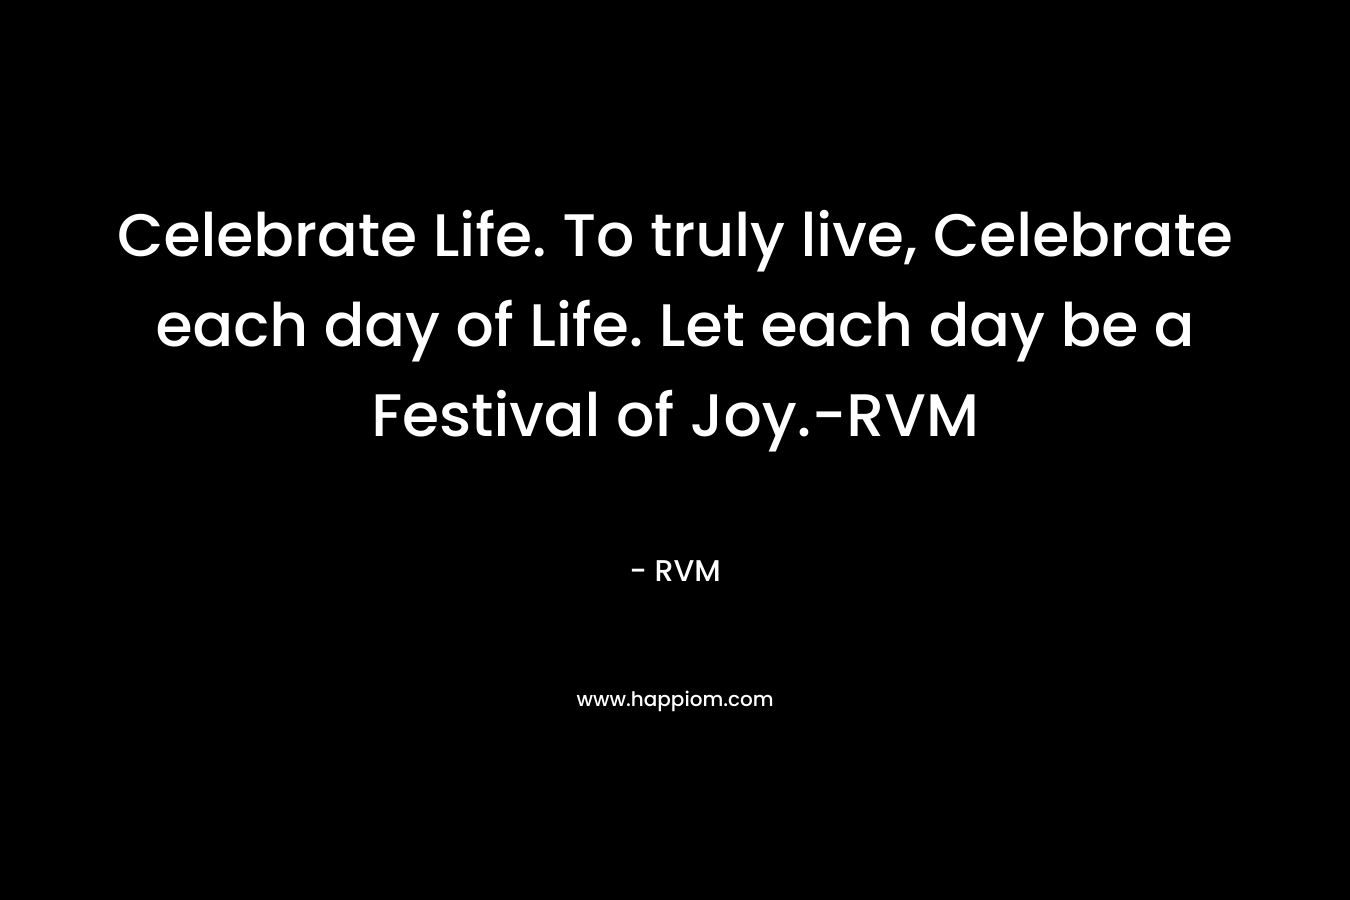 Celebrate Life. To truly live, Celebrate each day of Life. Let each day be a Festival of Joy.-RVM